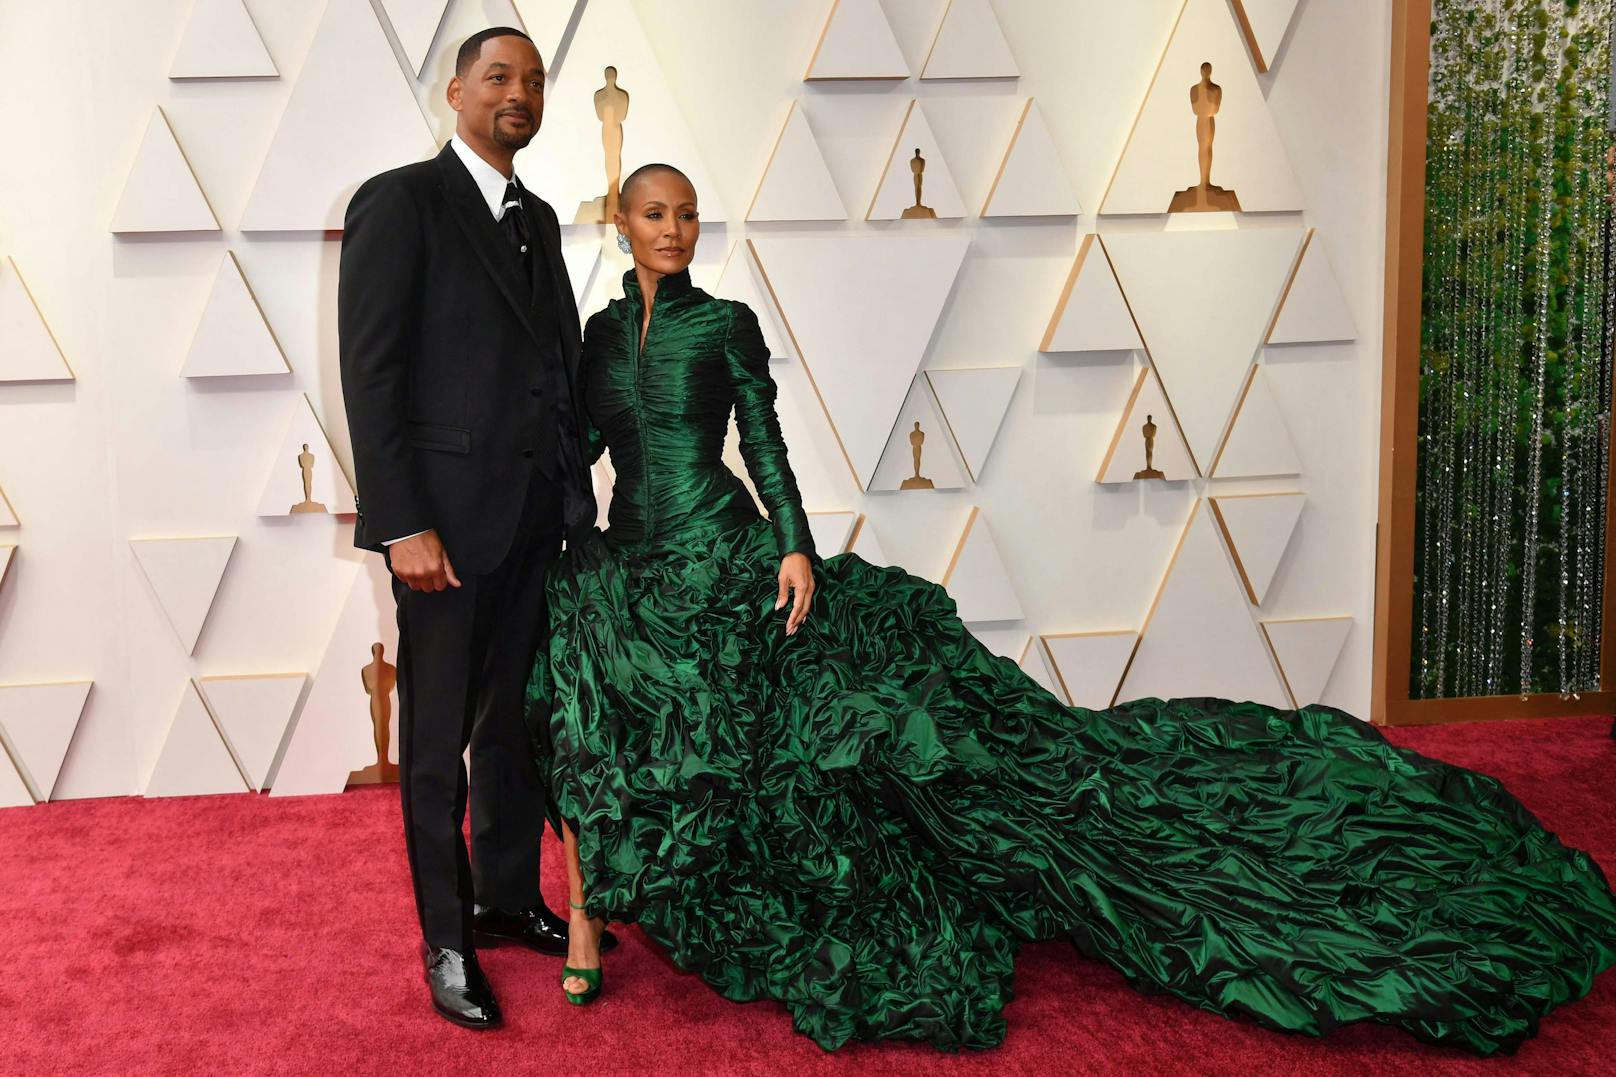 Hollywood-Star und "Bester Hauptdarsteller 2022"&nbsp;<strong>Will Smith</strong> an der Seite seiner umwerfenden Frau <strong>Jada Pink Smith</strong> in <strong>Jean Paul Gaultier</strong>.